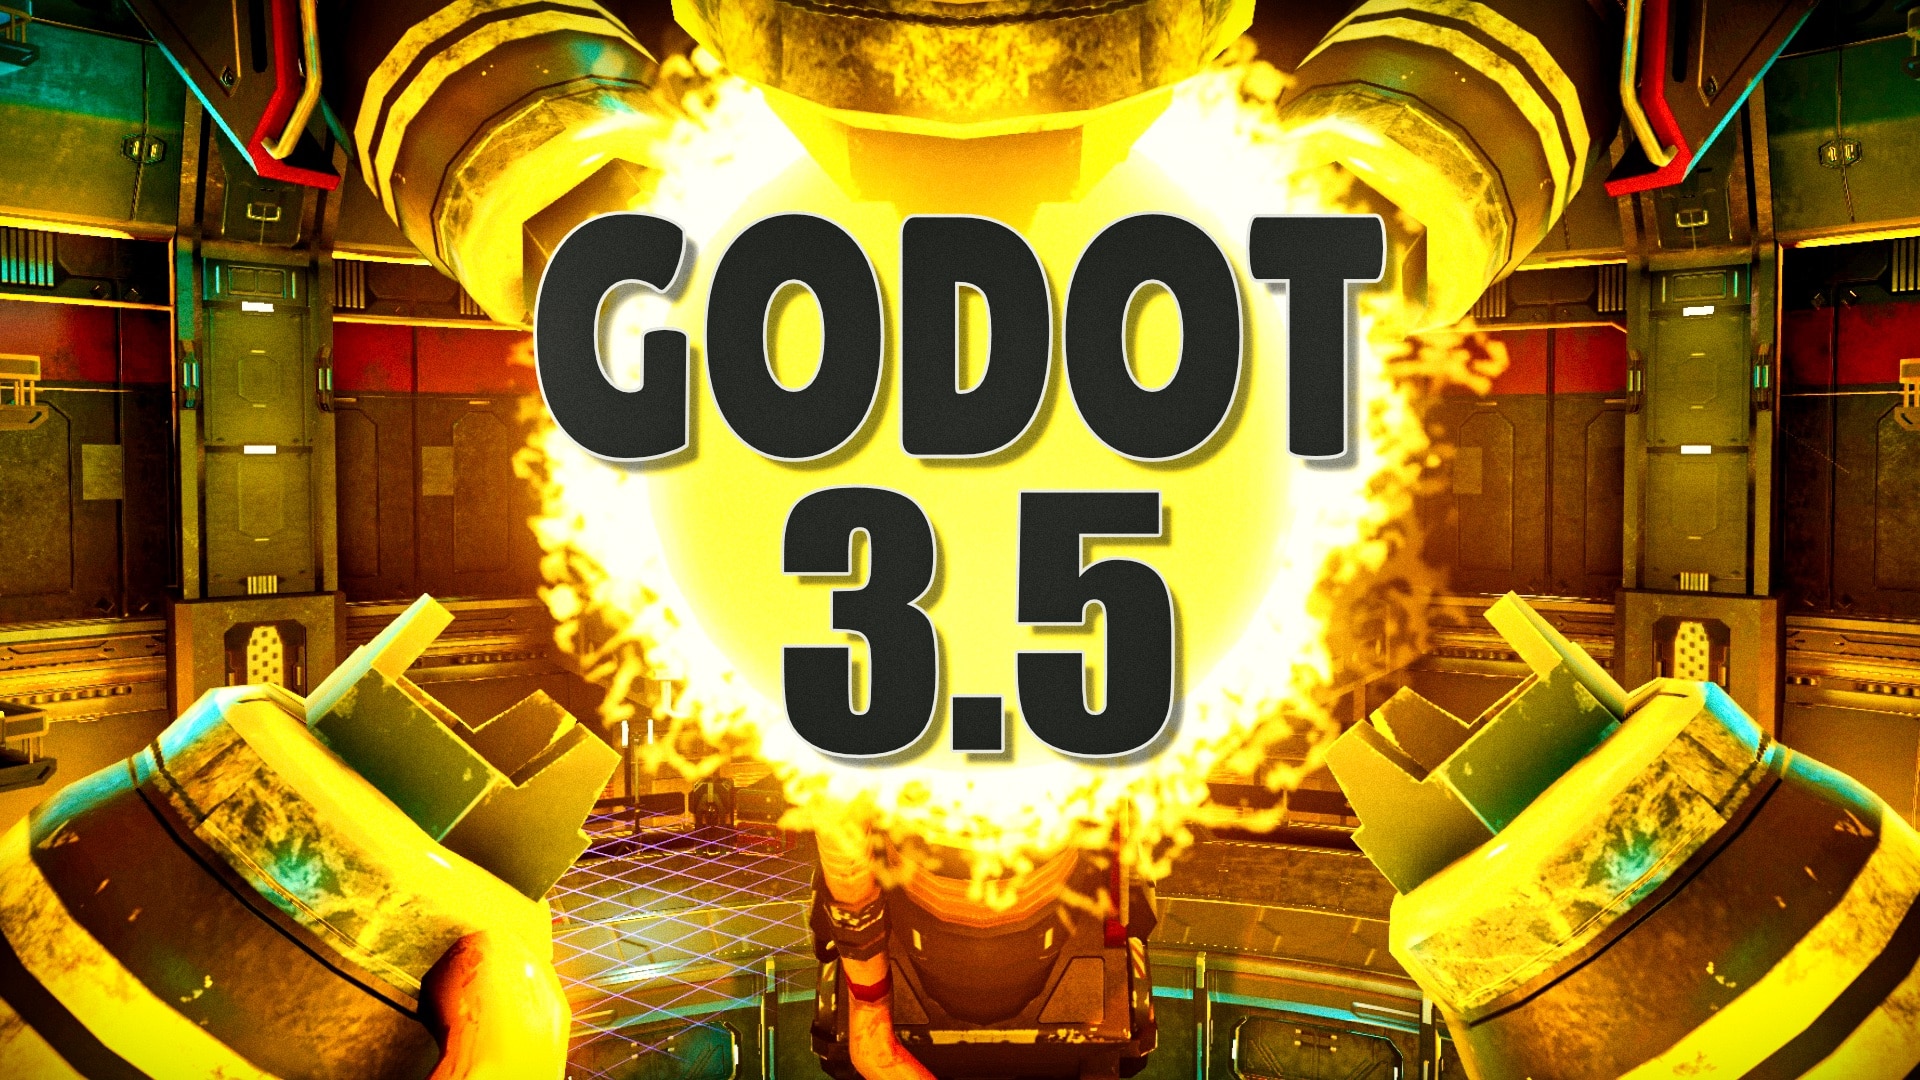 godot-3-5-launched-gamefromscratch-knowledge-and-brain-activity